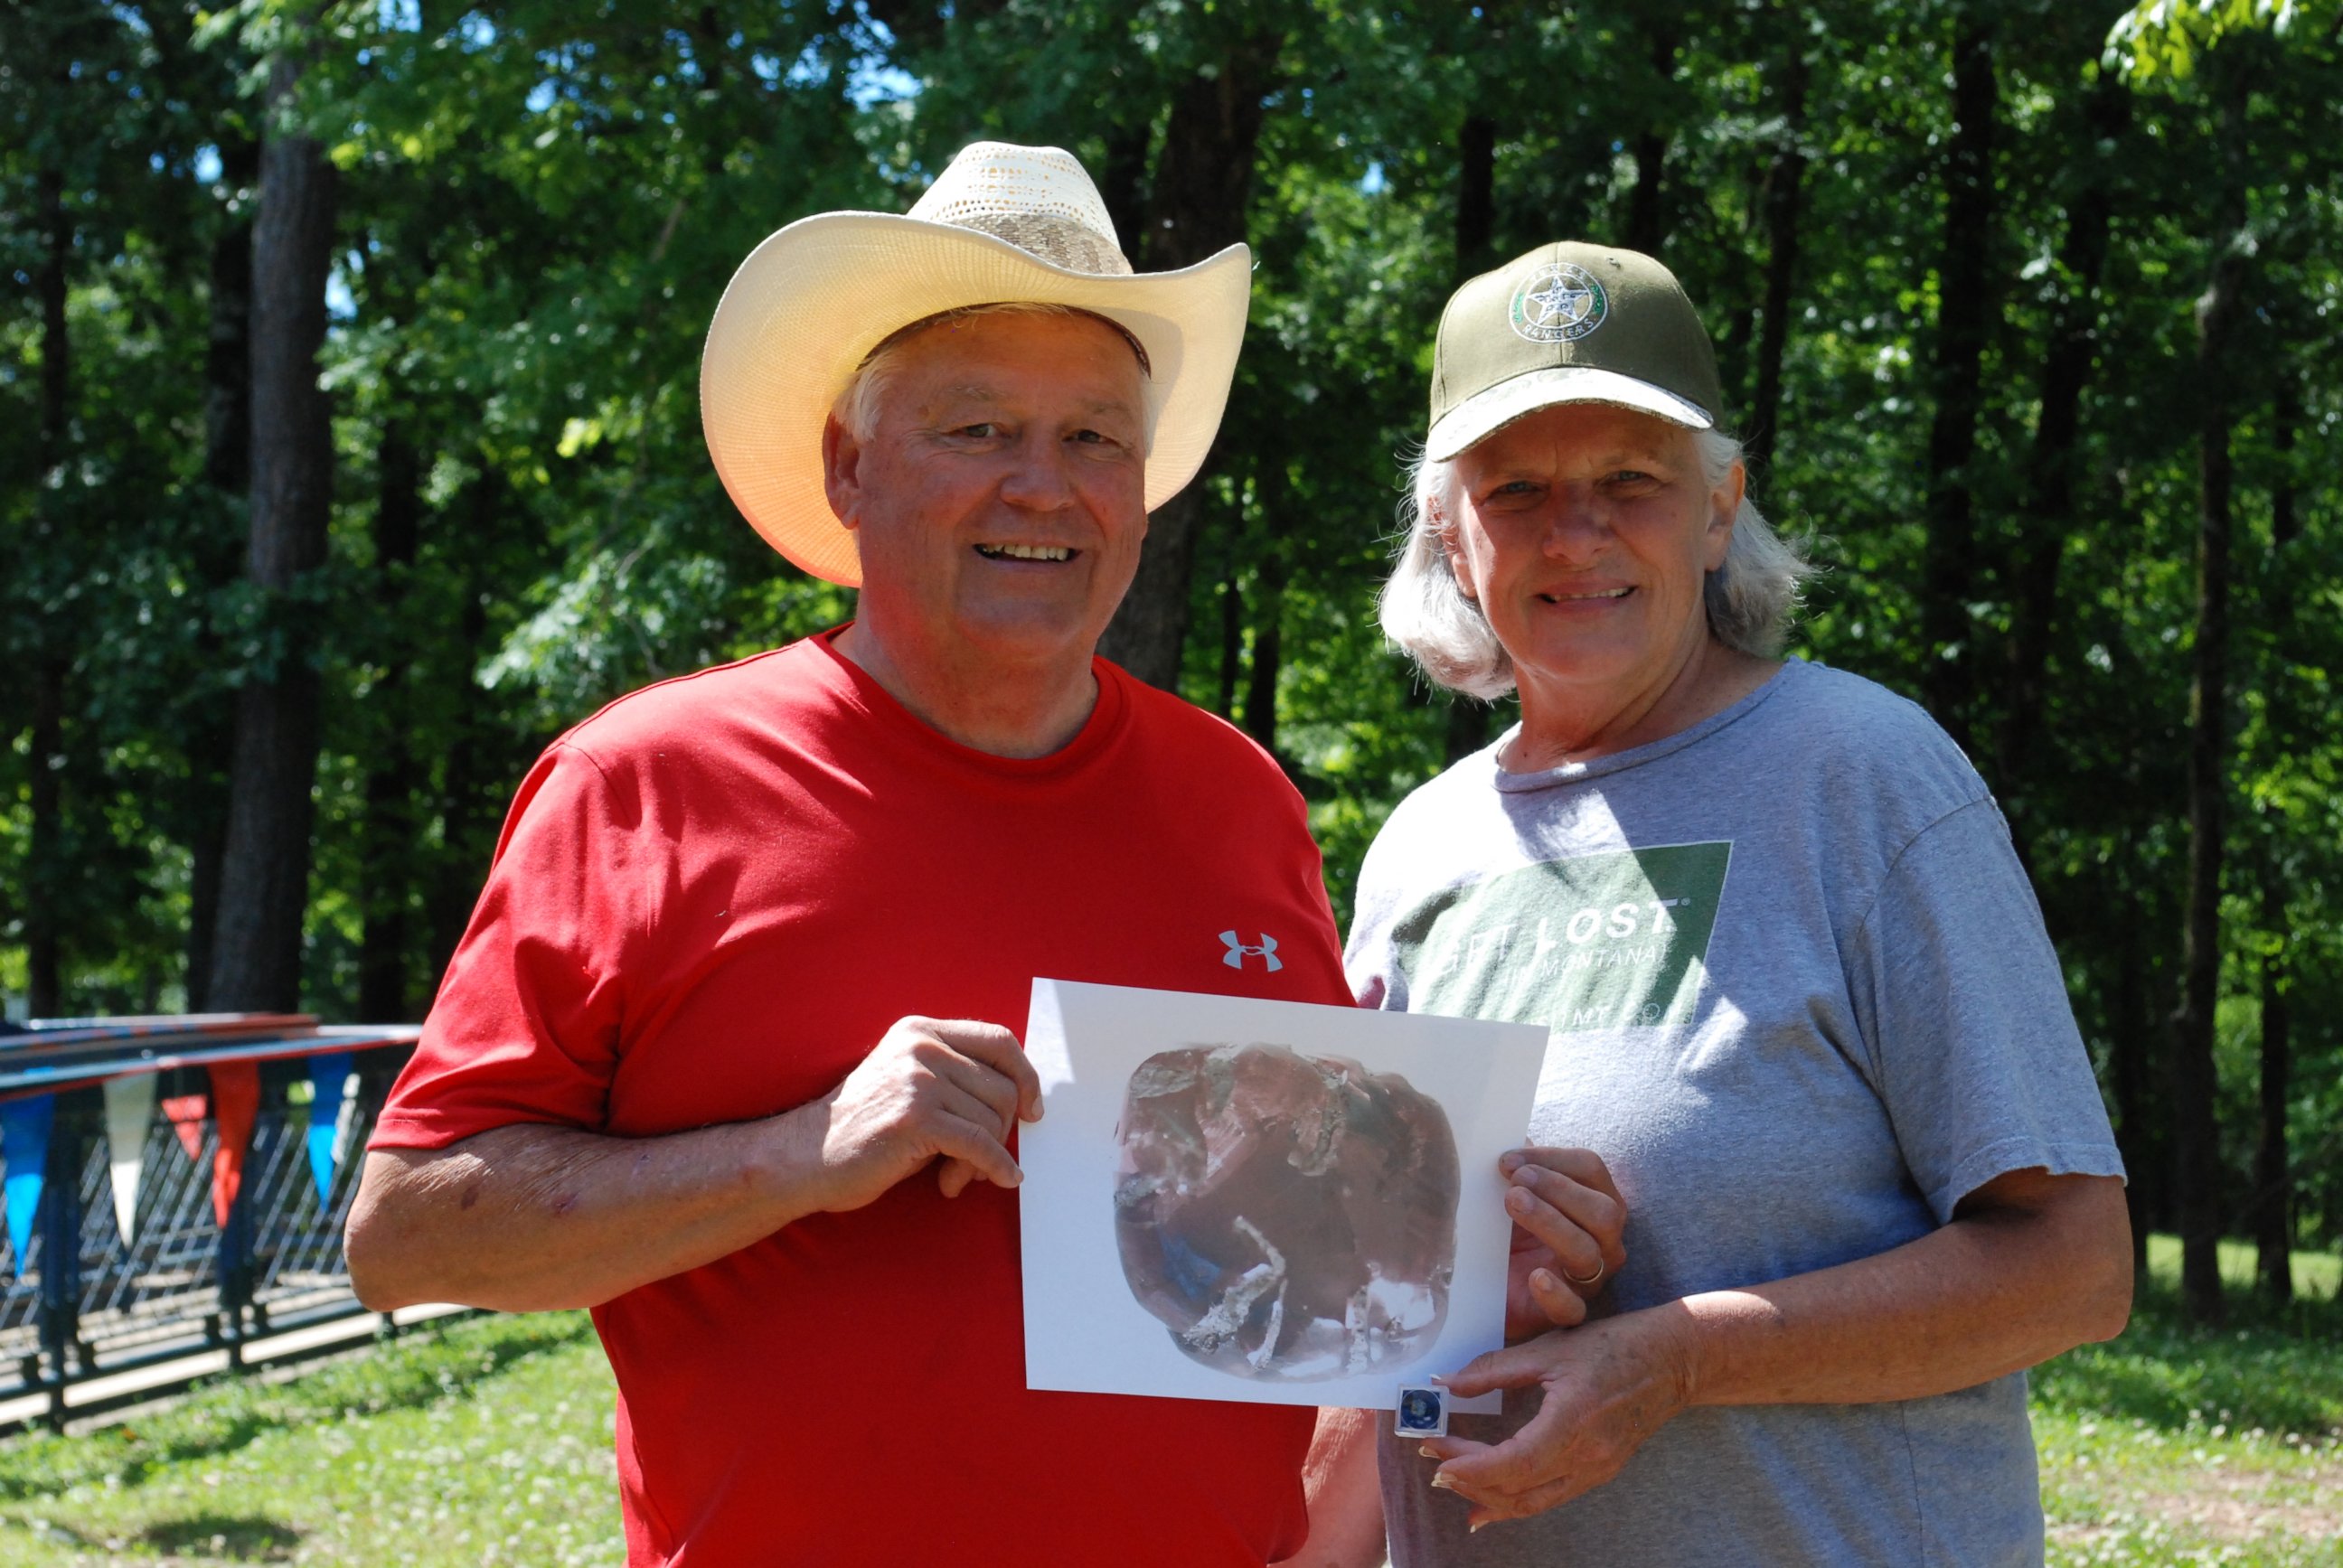 PHOTO: Wendell Fox beside his wife Jennifer Fox at Crater of Diamonds State Park in Arkansas on May 13, 2017.